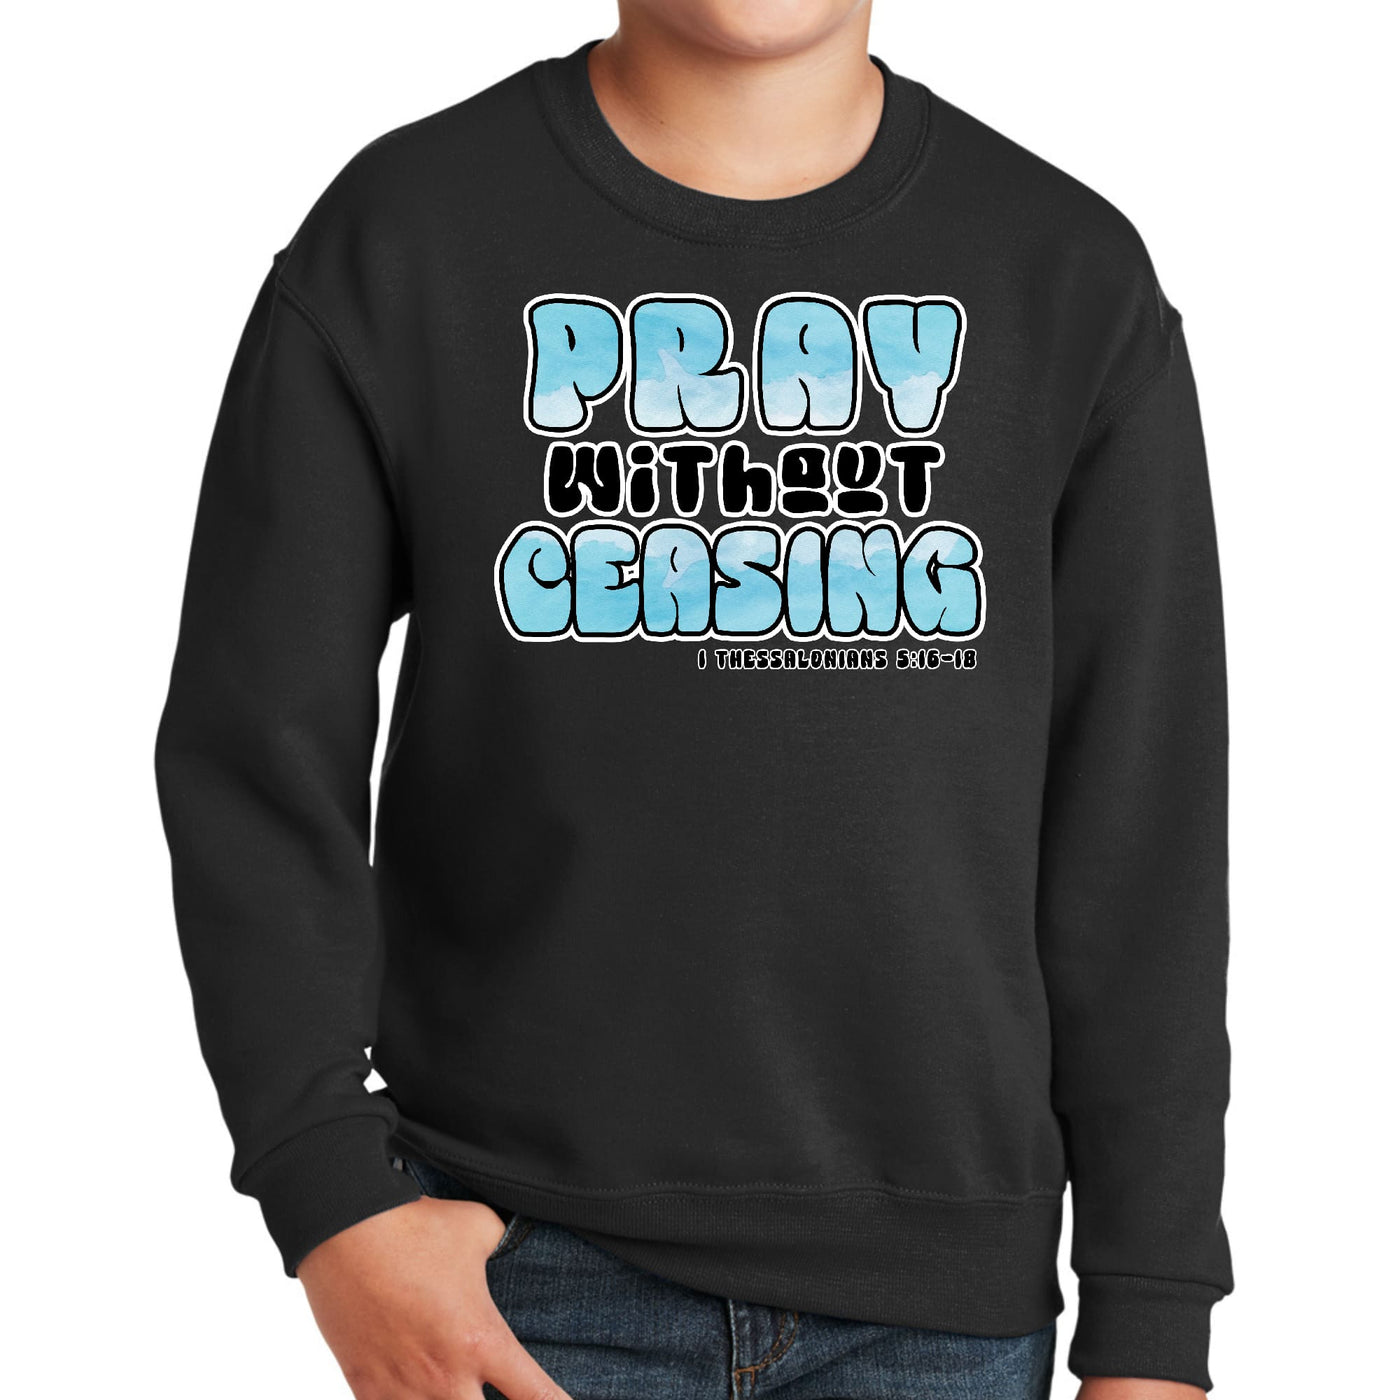 Youth Long Sleeve Crewneck Sweatshirt Pray Without Ceasing, - Youth